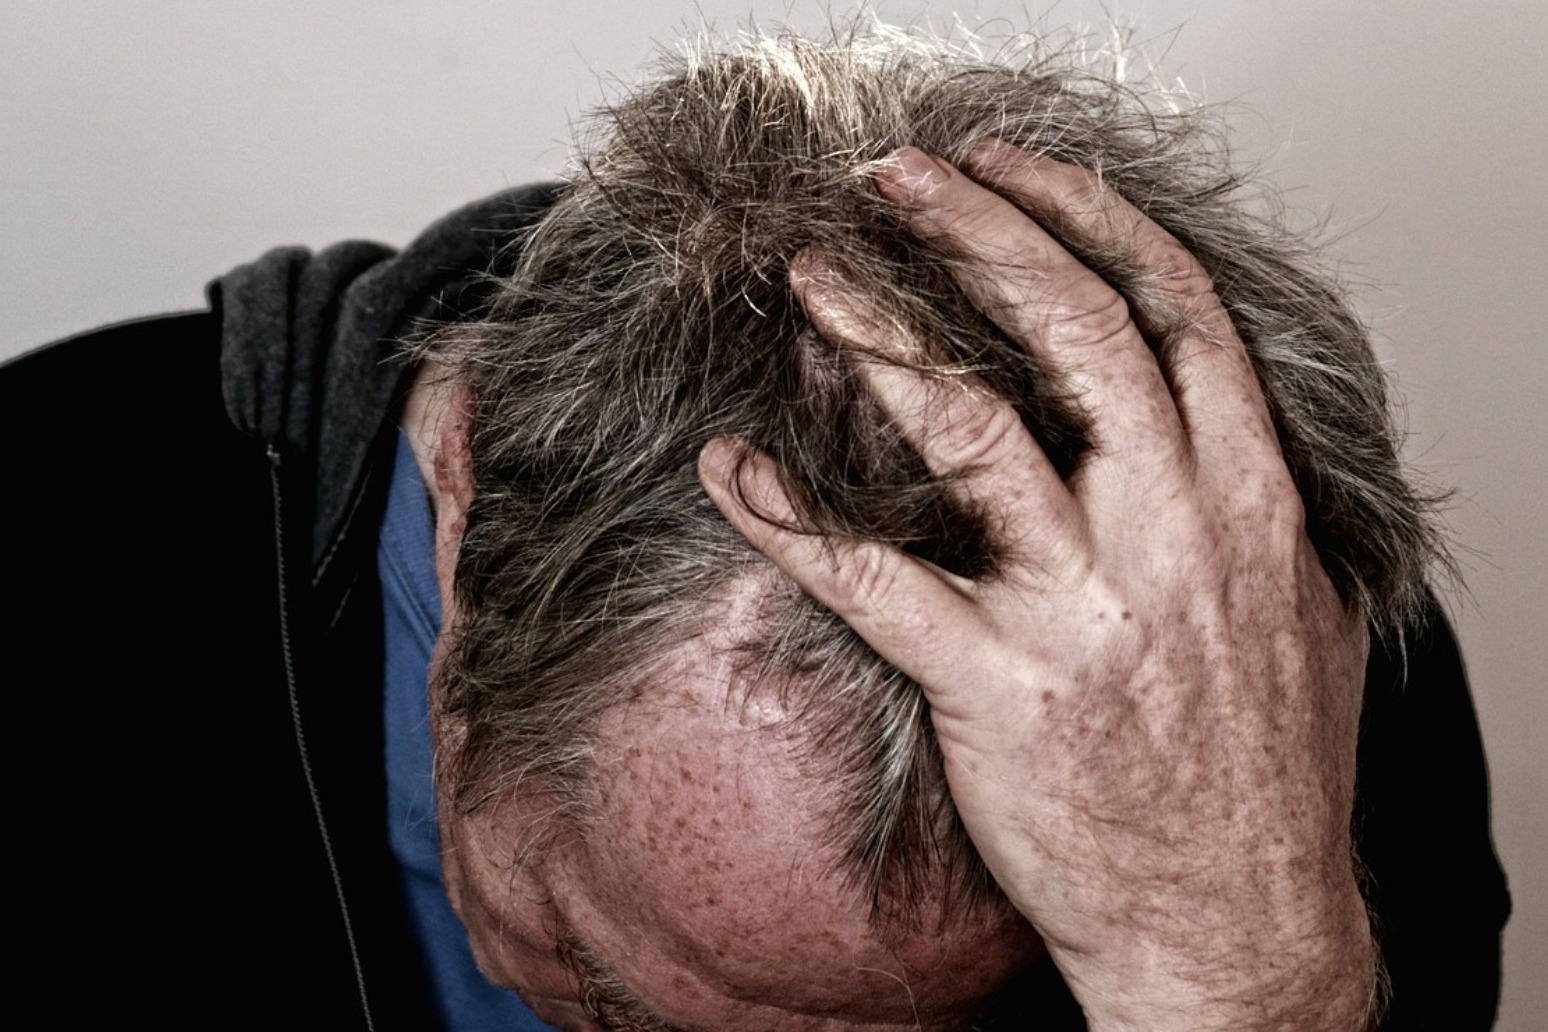 Global estimates of headaches suggest disorder impacts more than 50 of people